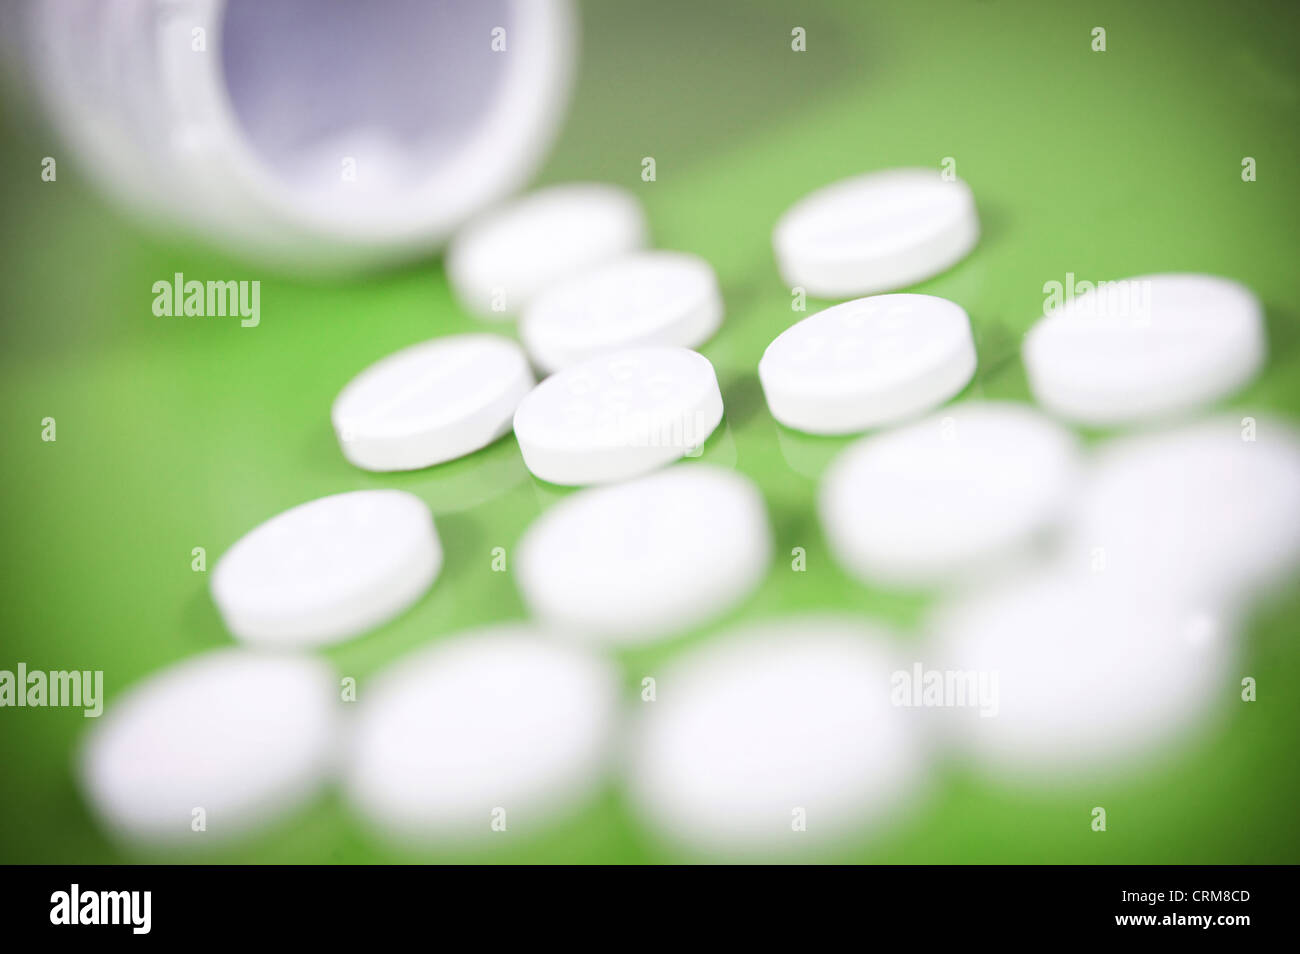 White paracetamol tablets spilling from a bottle against a green background. Stock Photo